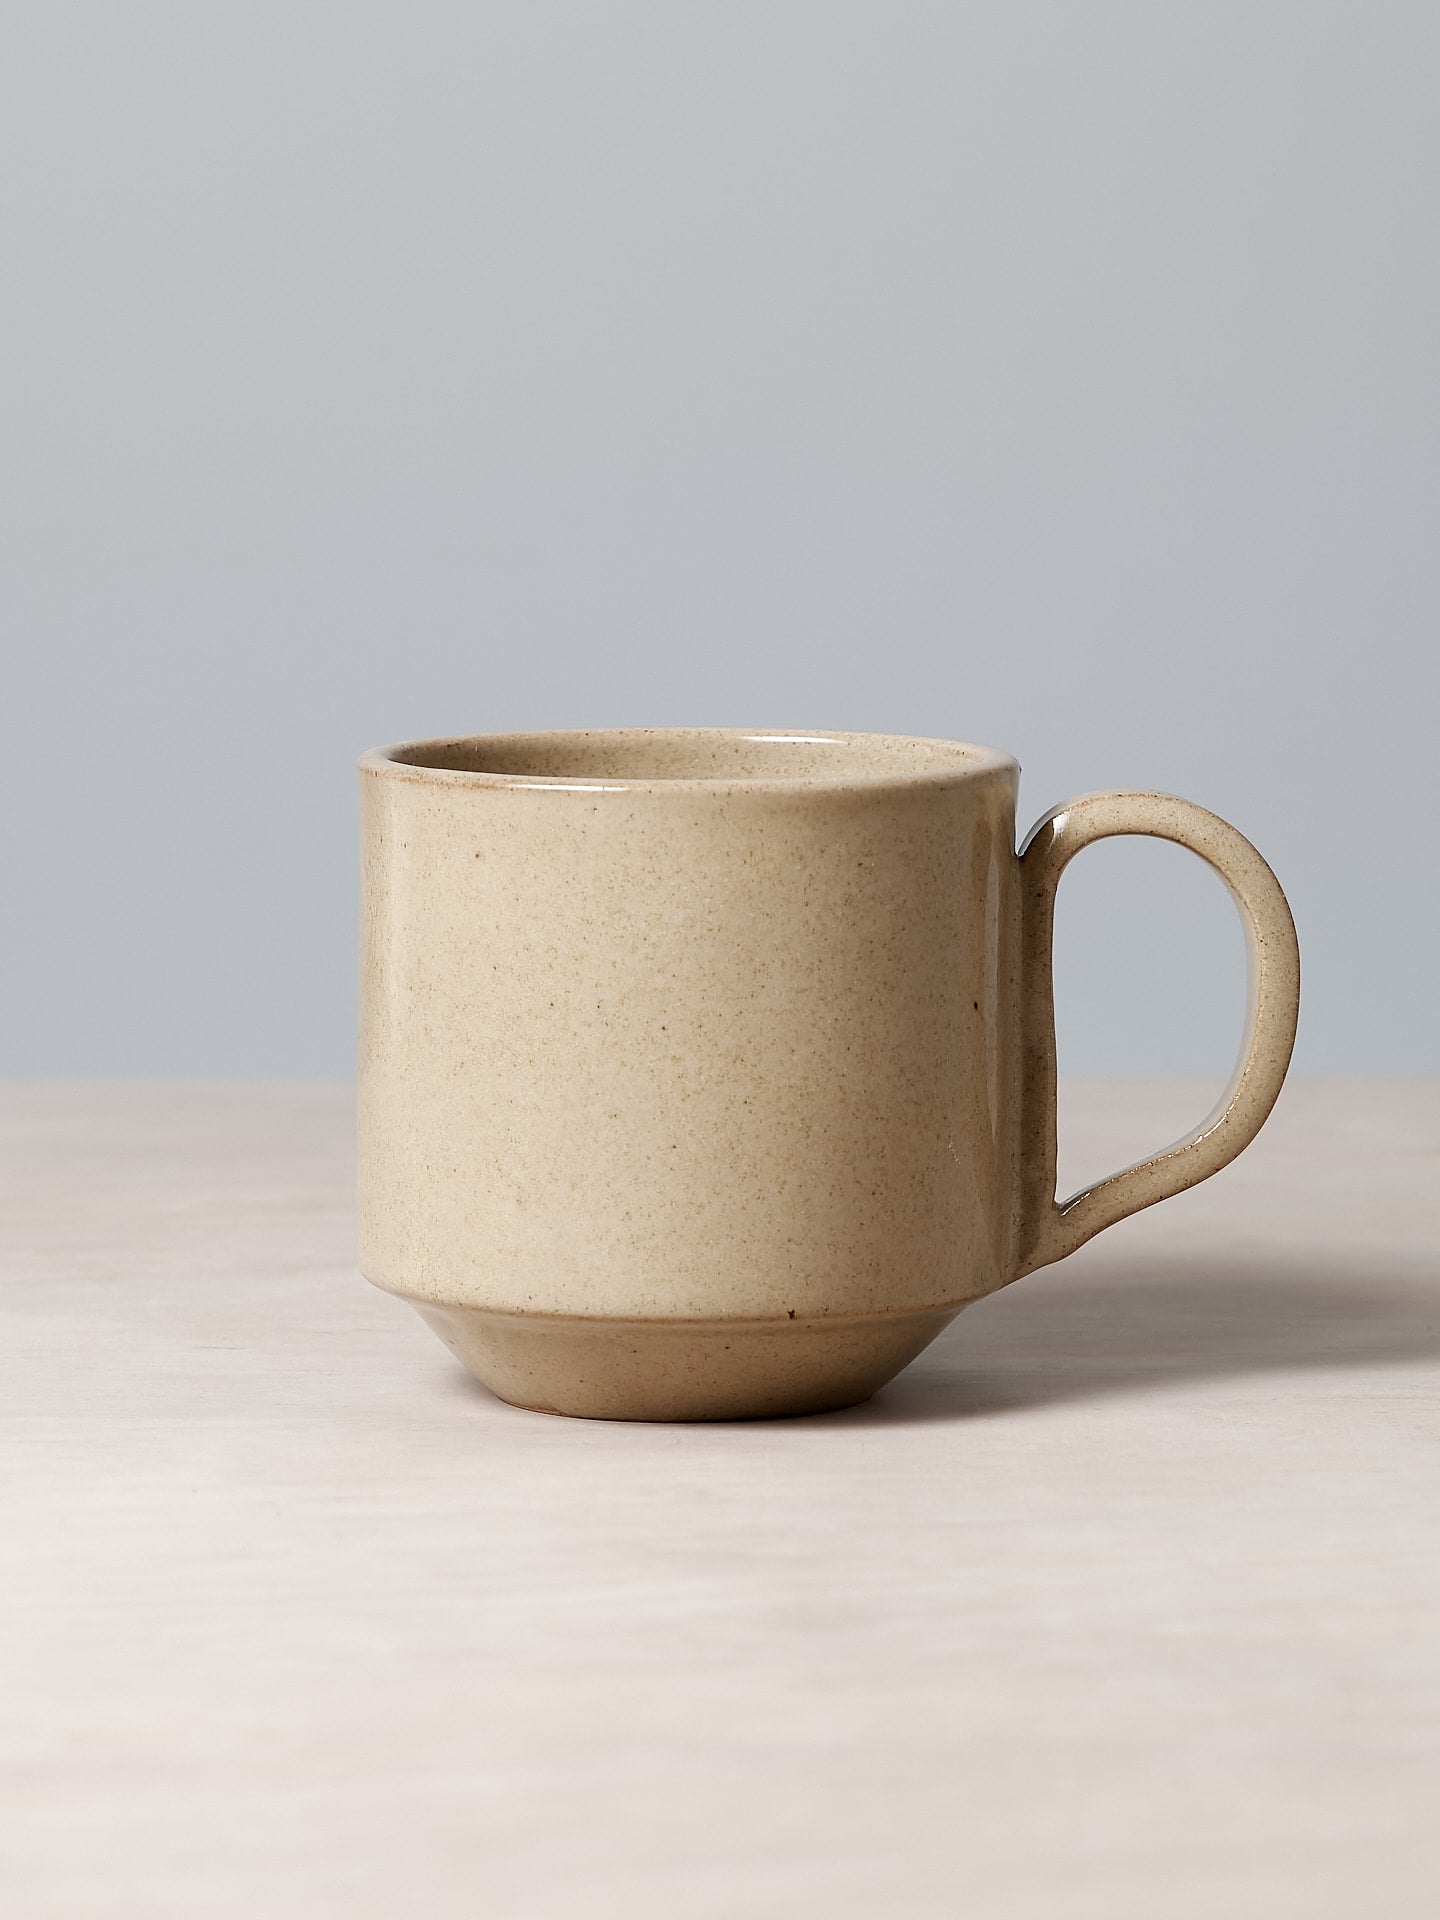 A Large Stacking Mug - Sand by Richard Beauchamp sitting on a wooden table.